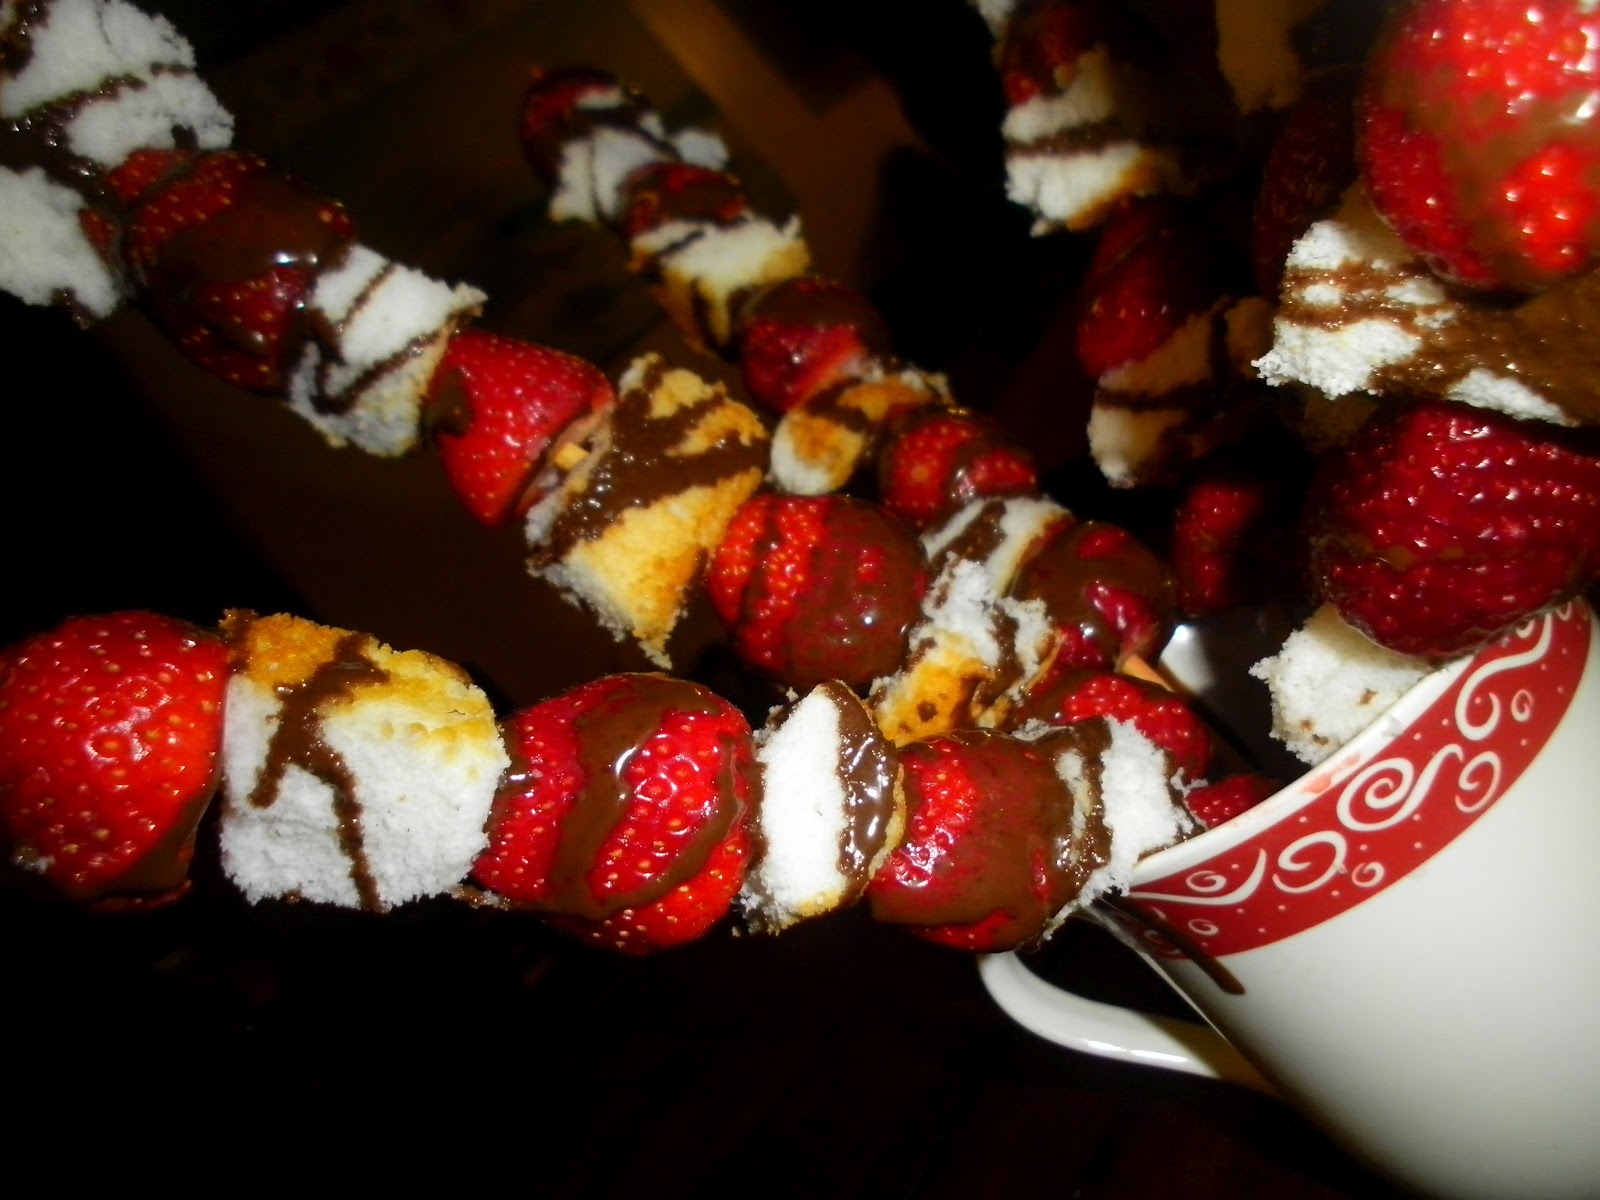 square chocolate cake with strawberries Strawberry & Angel Food Cake on a stickWith Chocolate!!